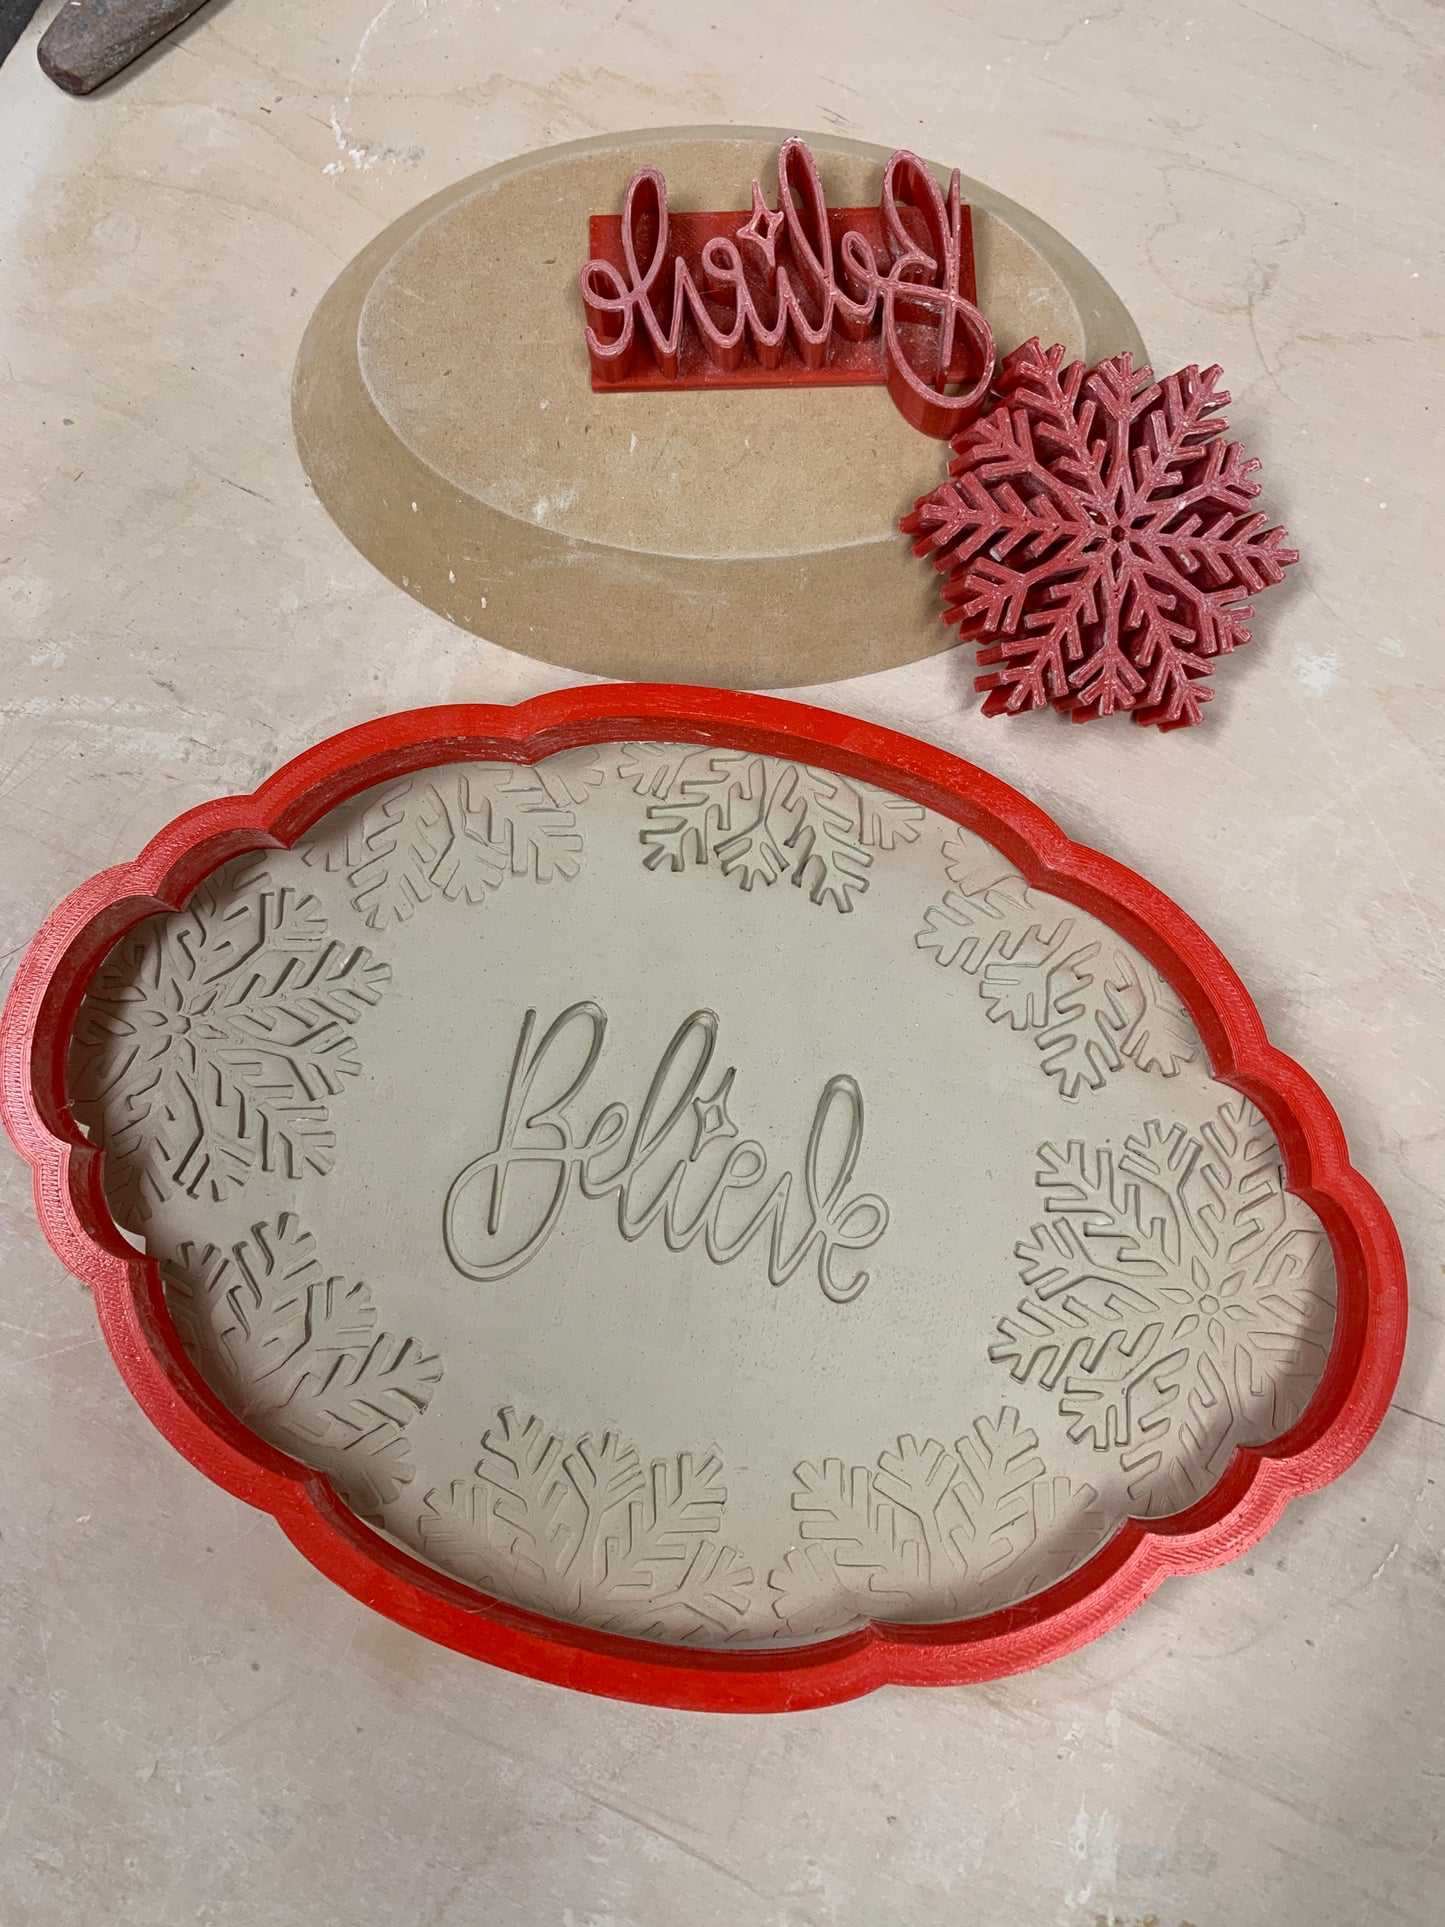 Ornate XL Oval Tray, Clay Cutter - Plastic 3D printed, pottery tool, multiple sizes